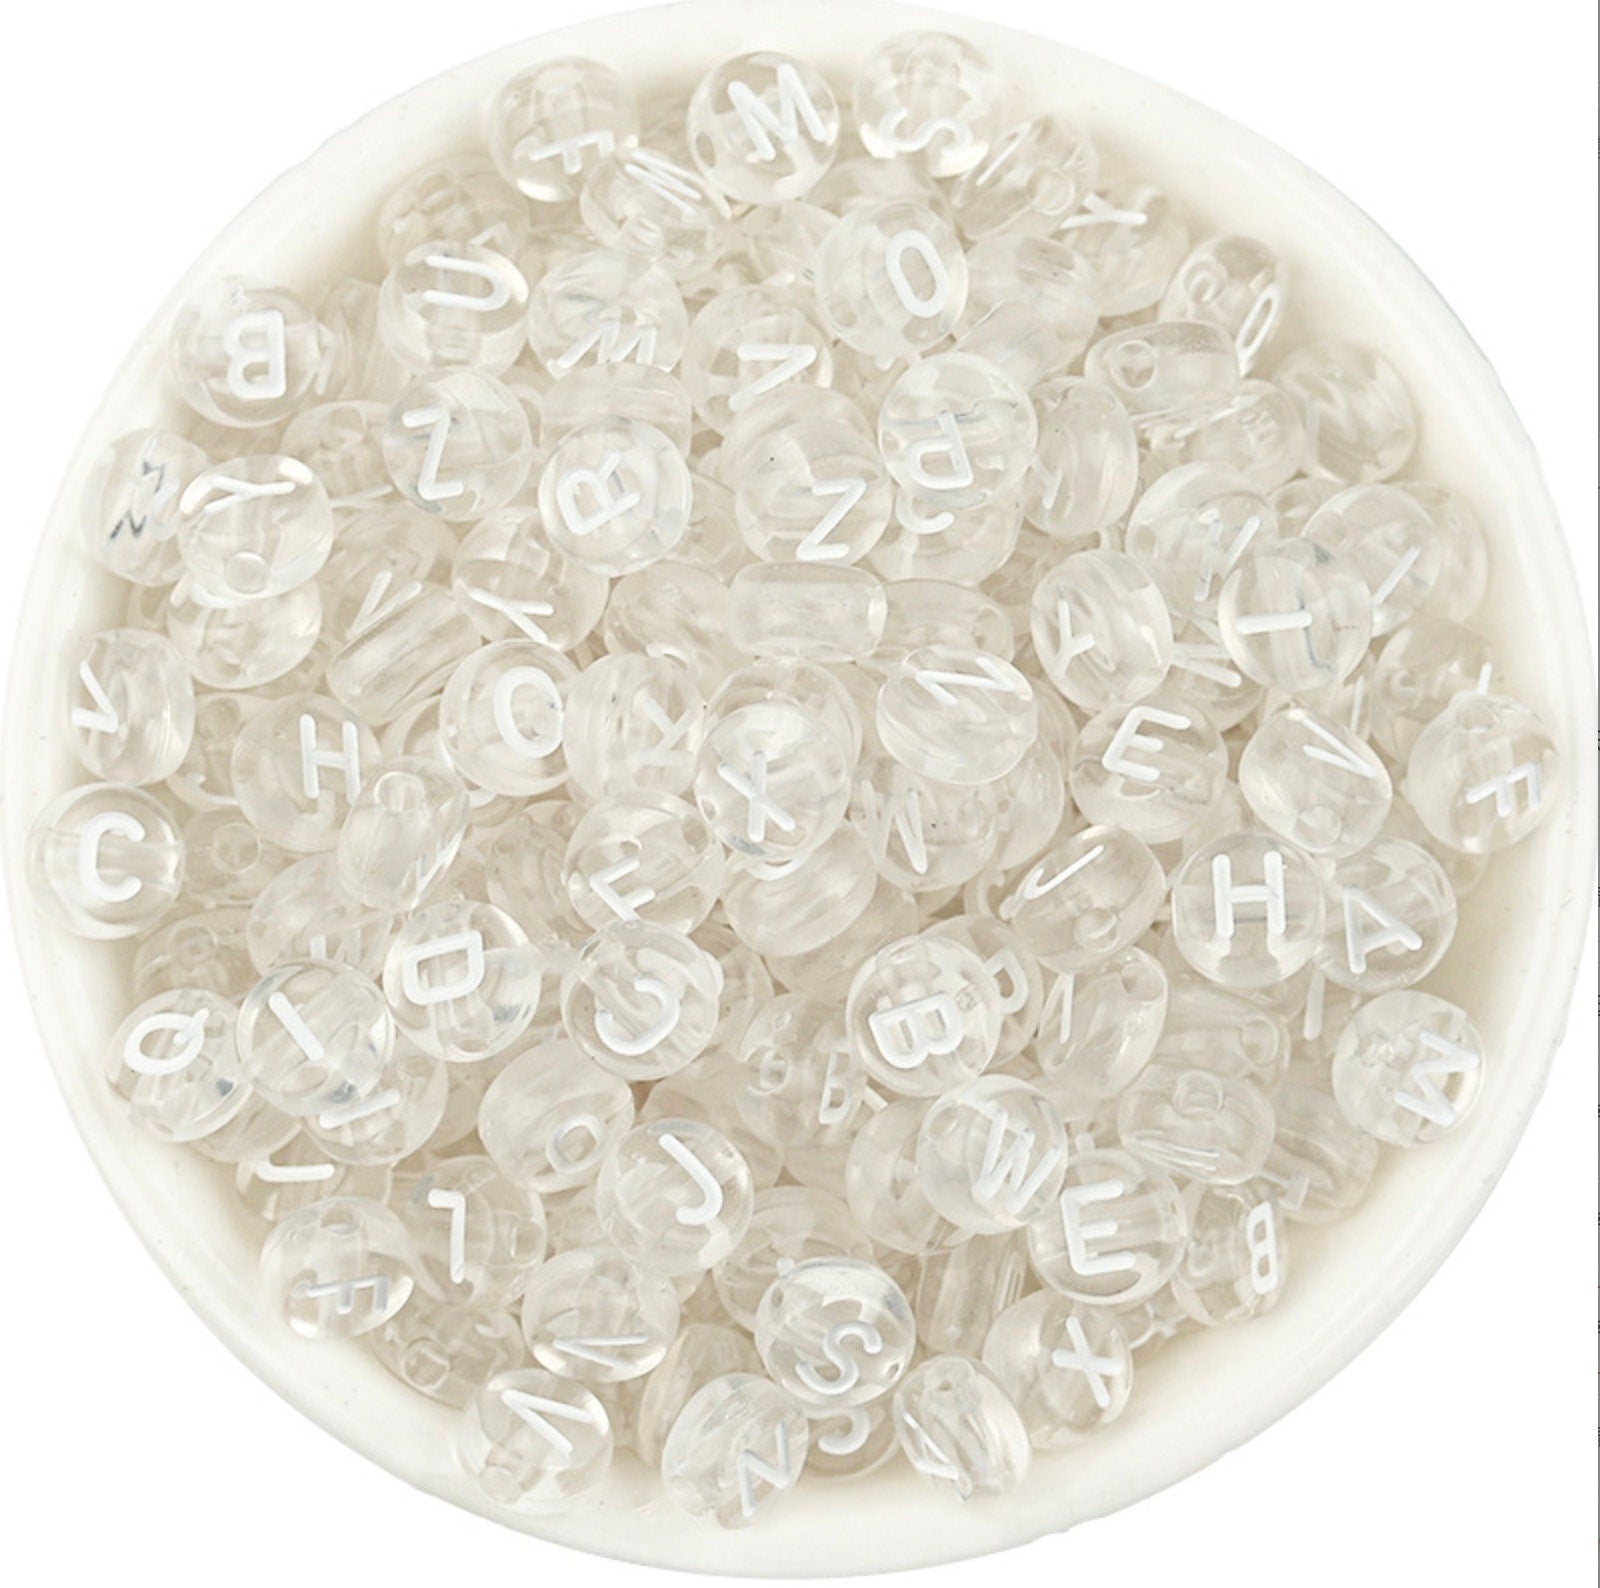 7MM Transparent Acrylic Letter Beads (200pc/400pc)